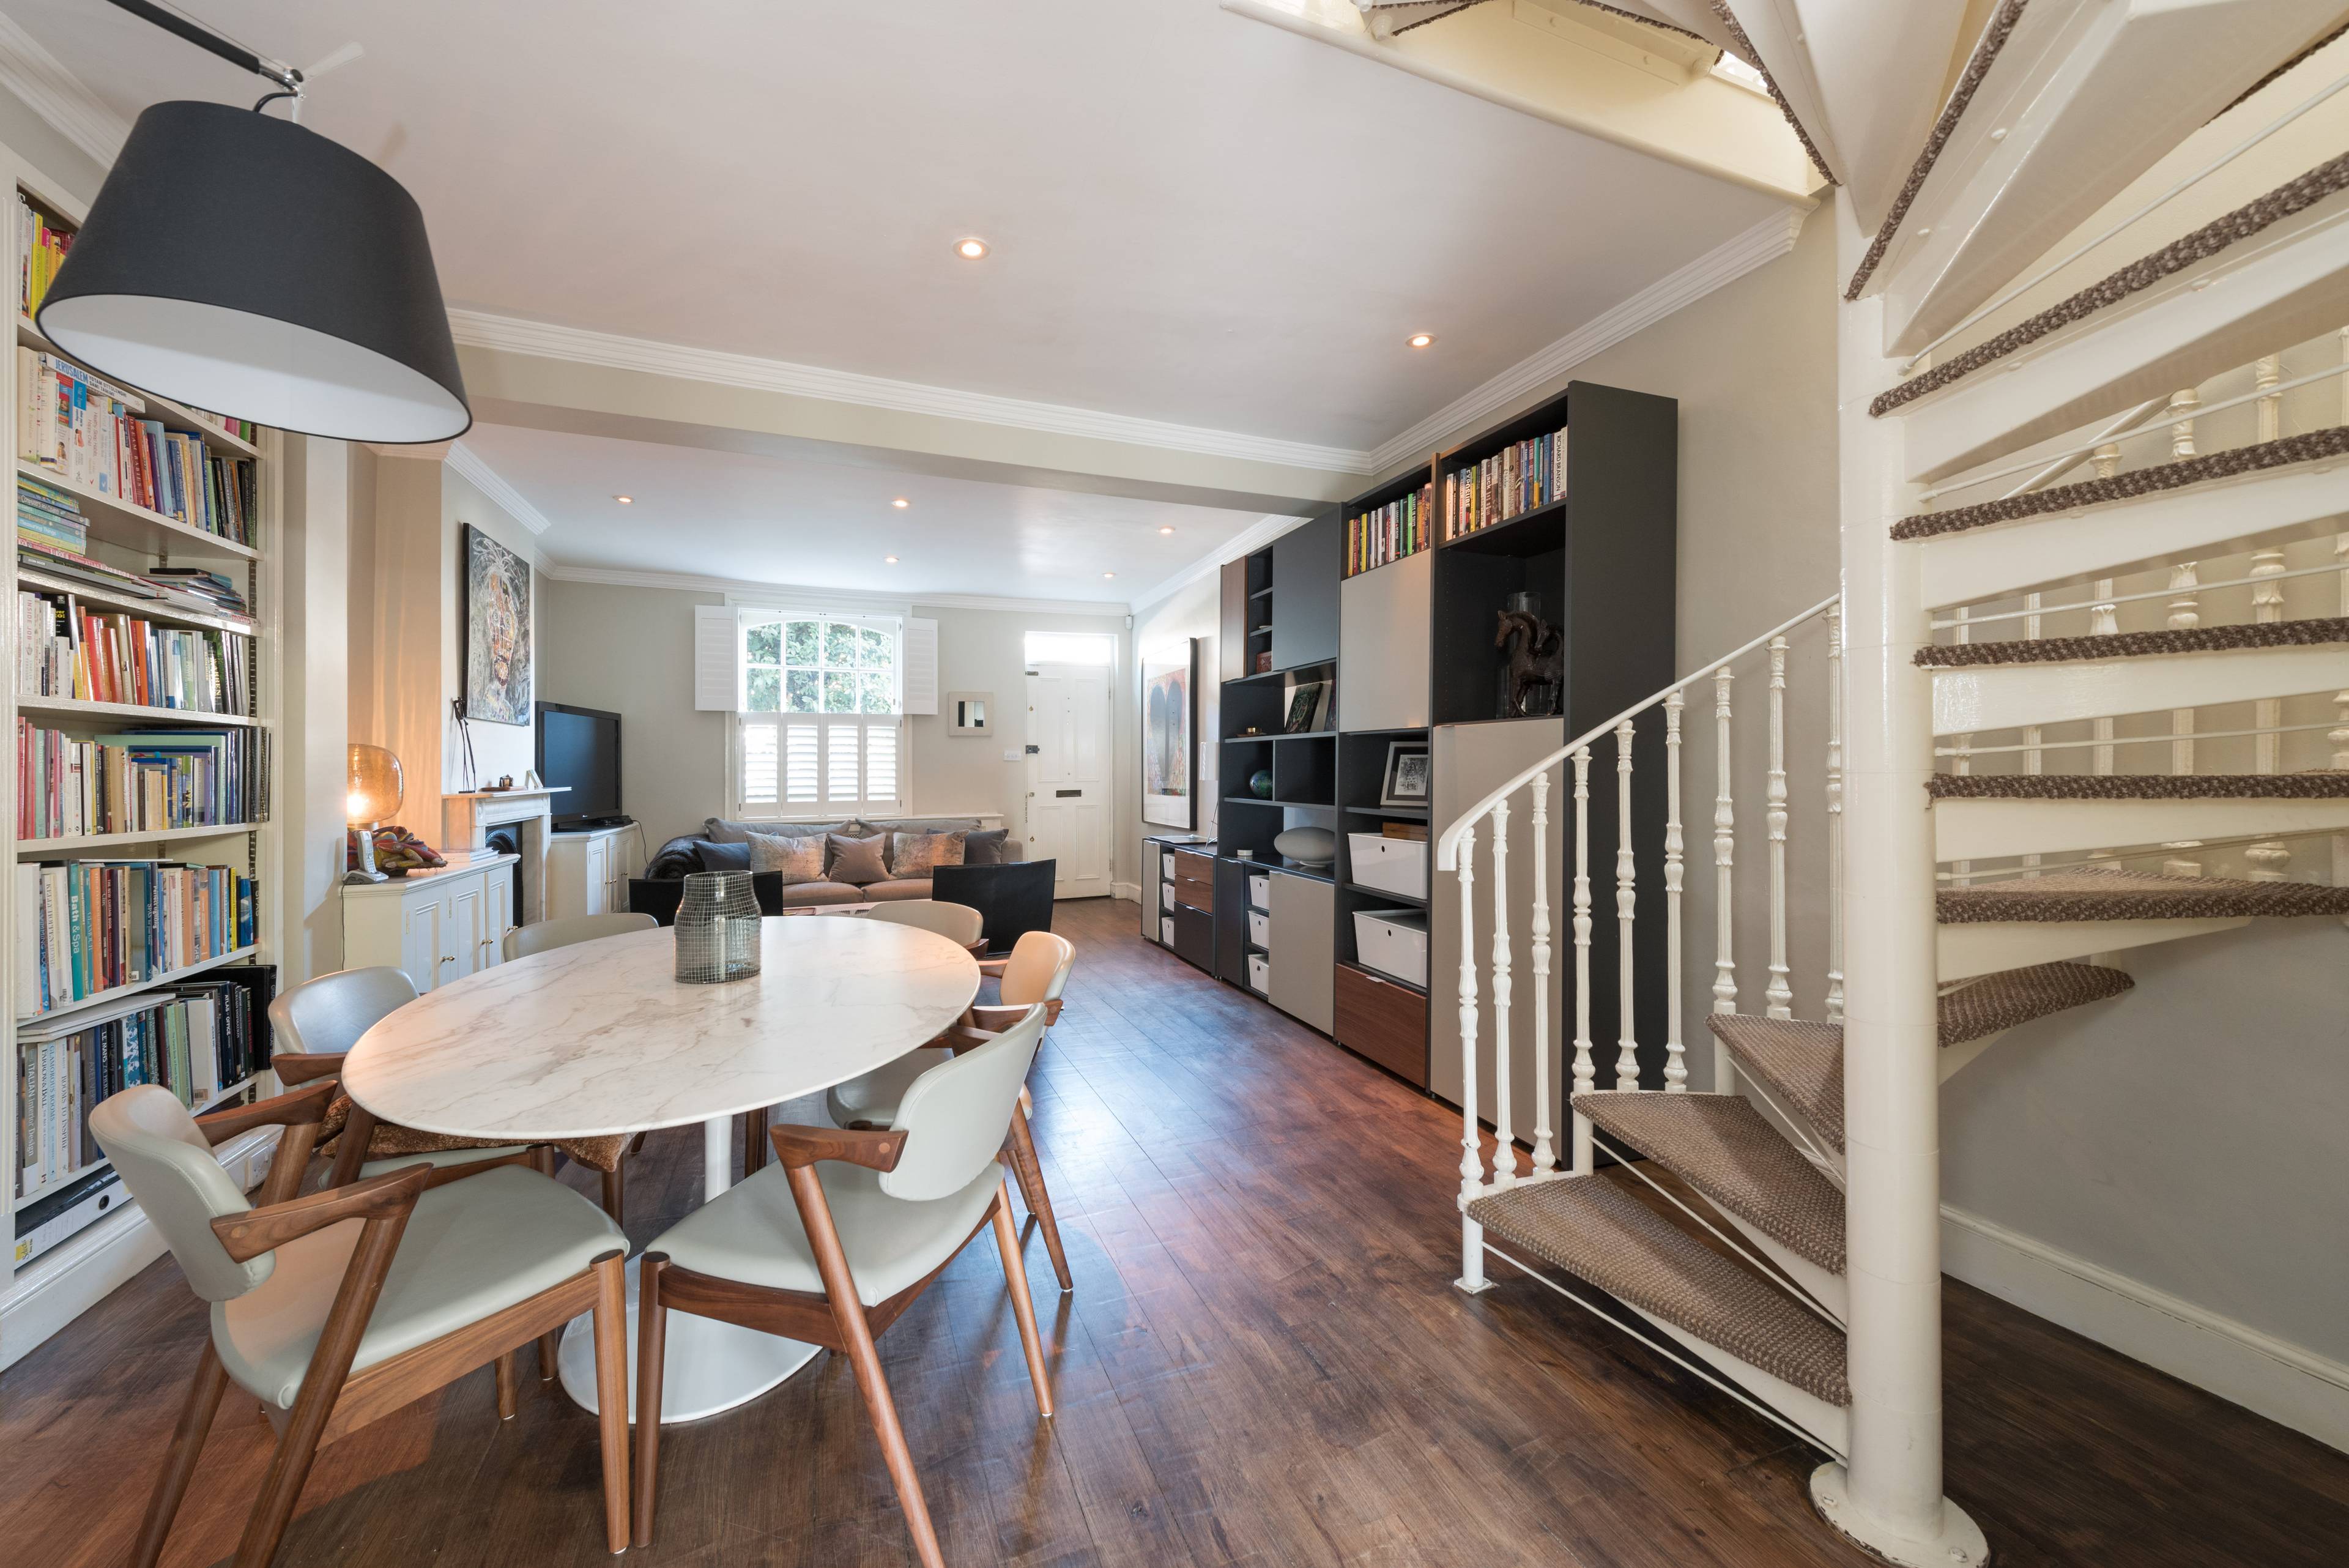 Lovely three bedroom Victorian family house with rear garden sympathetically updated by the current owner, moments away from Battersea Park and easy going boutique café/restaurant vibes.